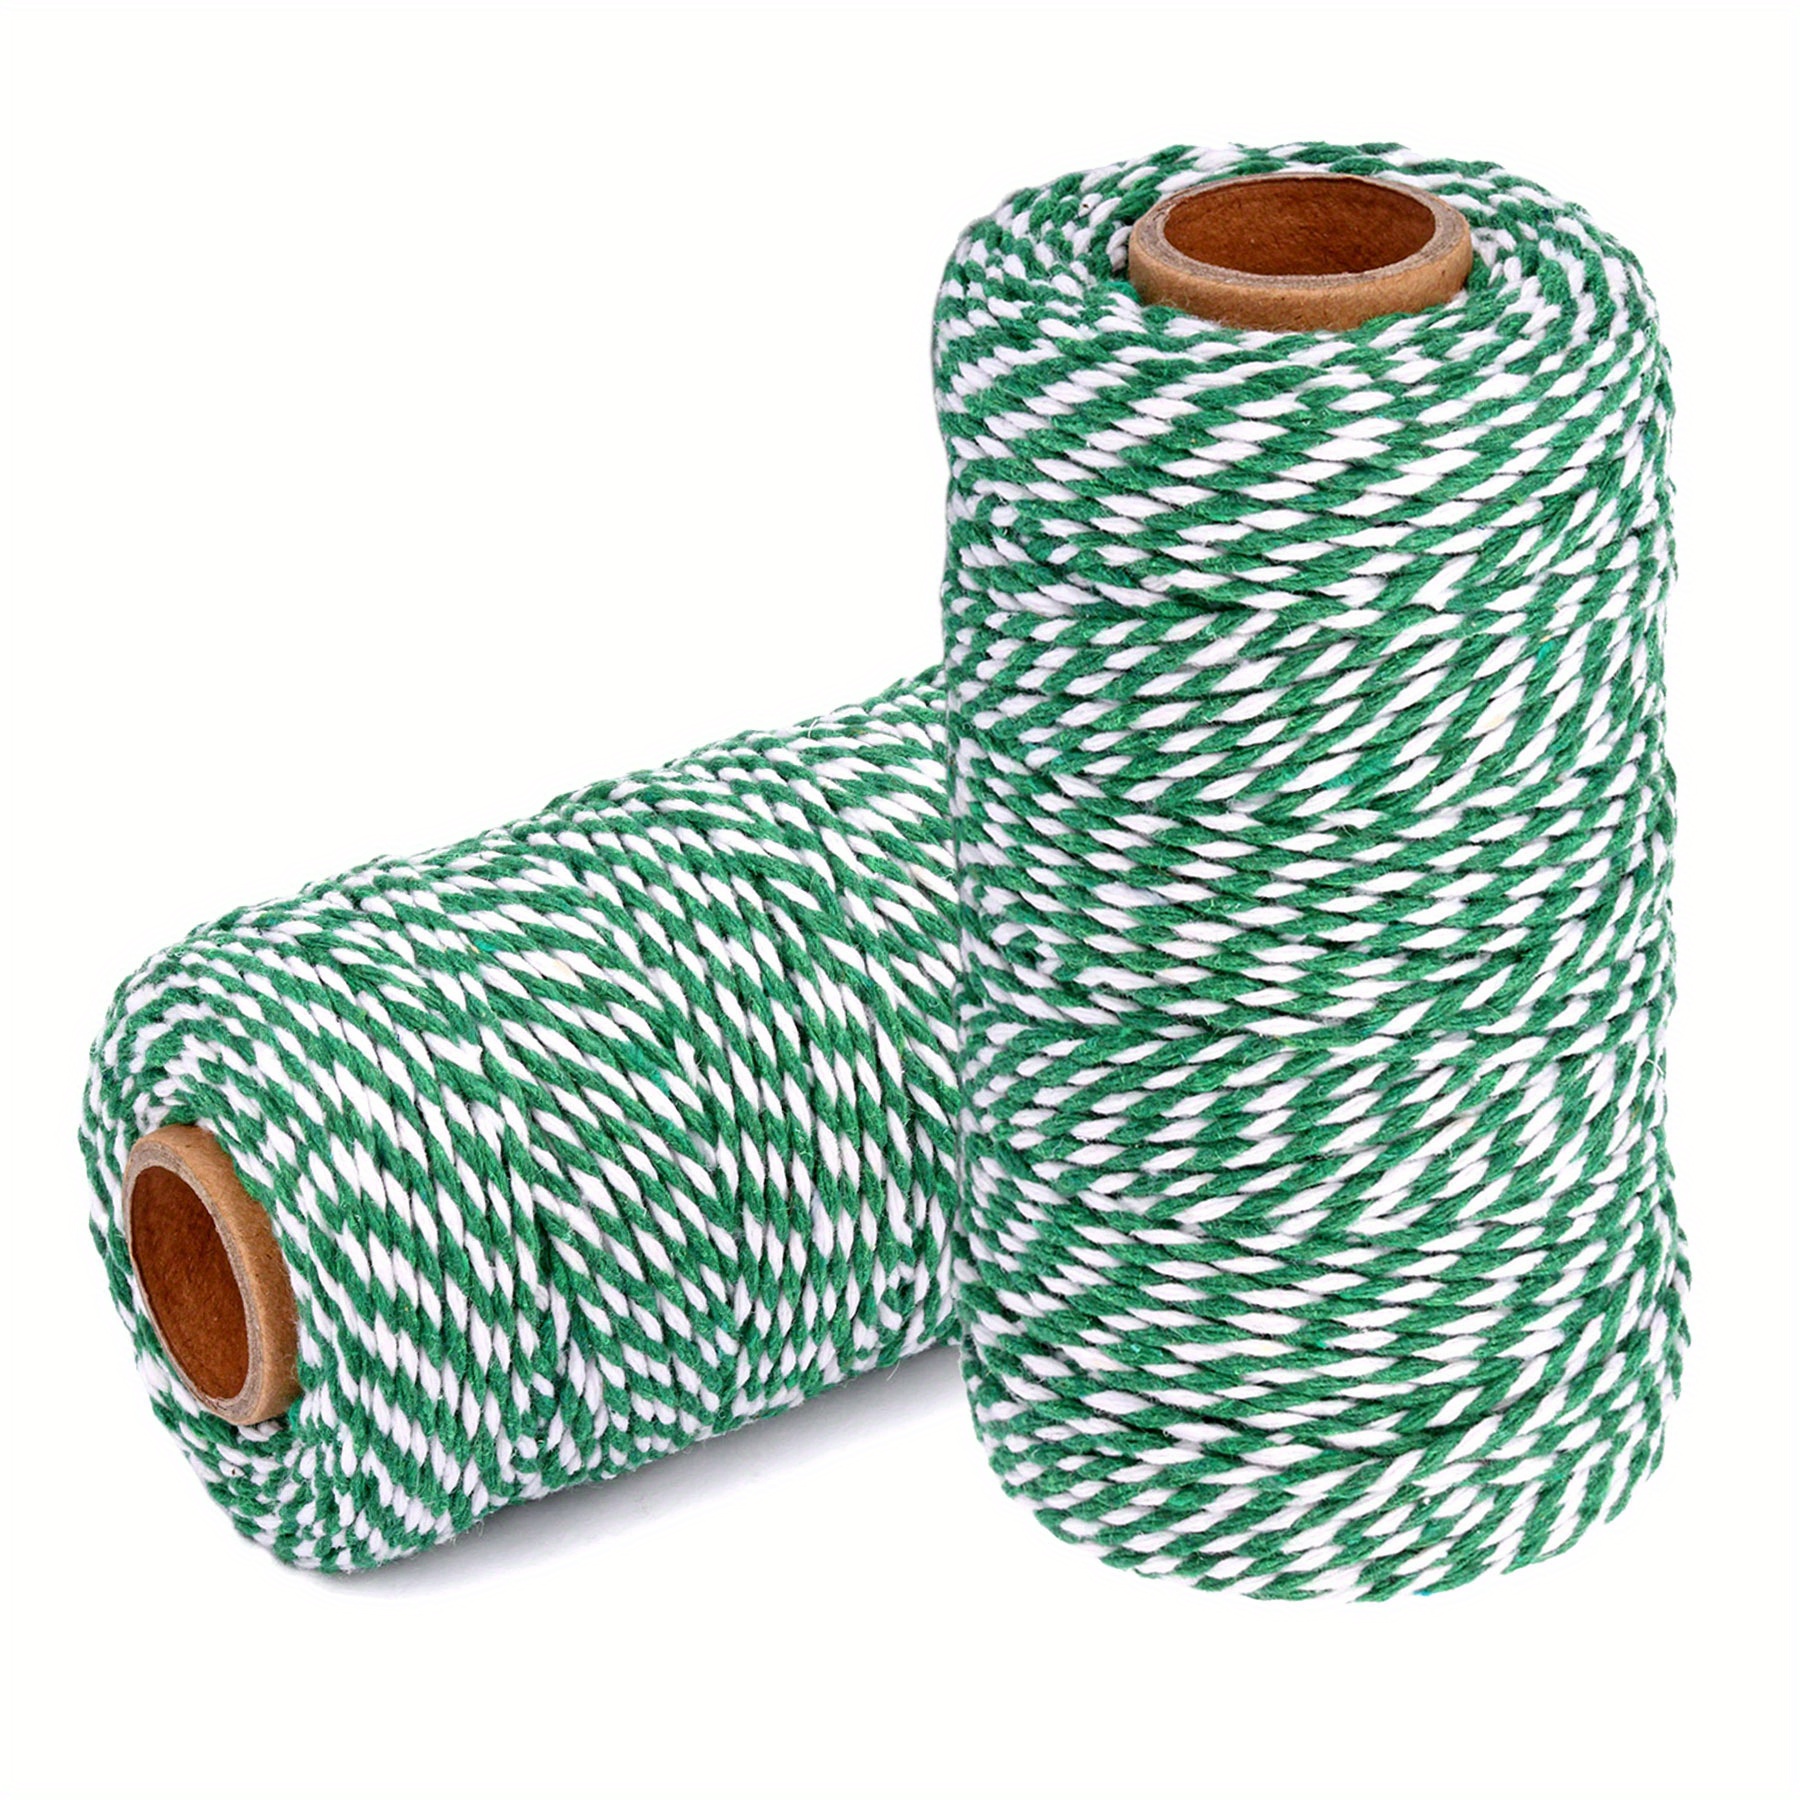 Green and White Bakers Twine